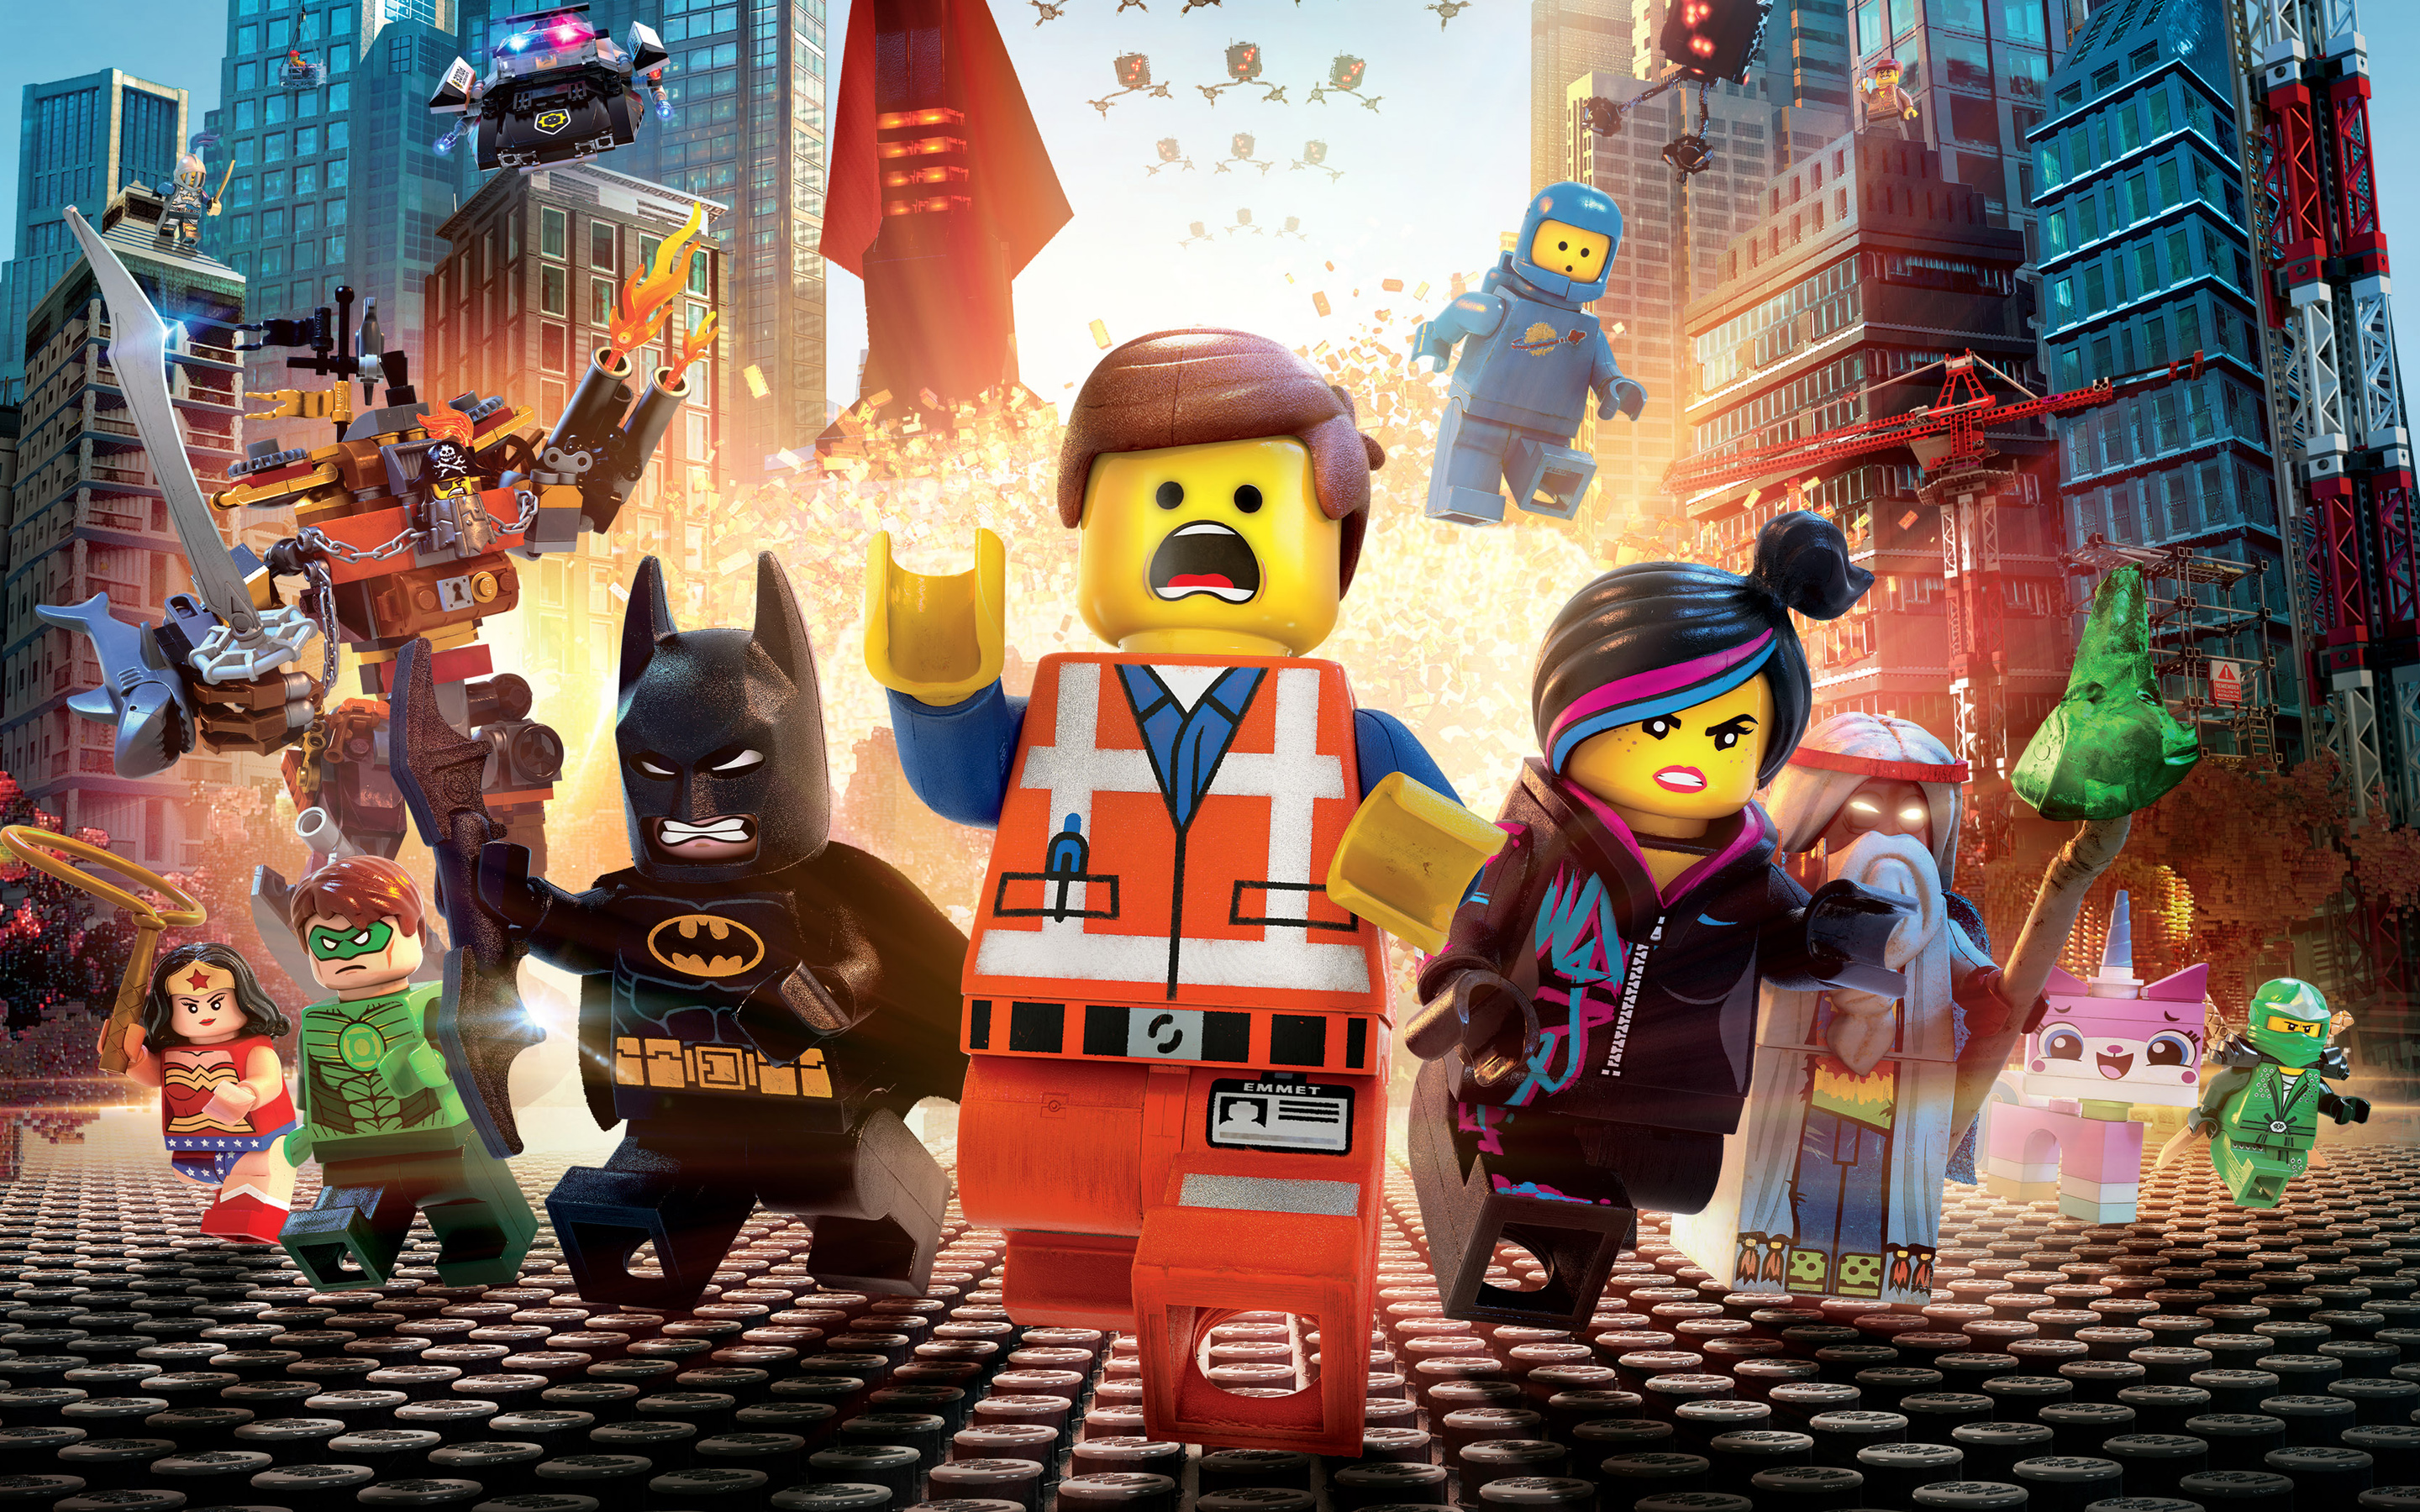 A post for The Lego Movie, featuring main characters Emmett, Wild Style, and others